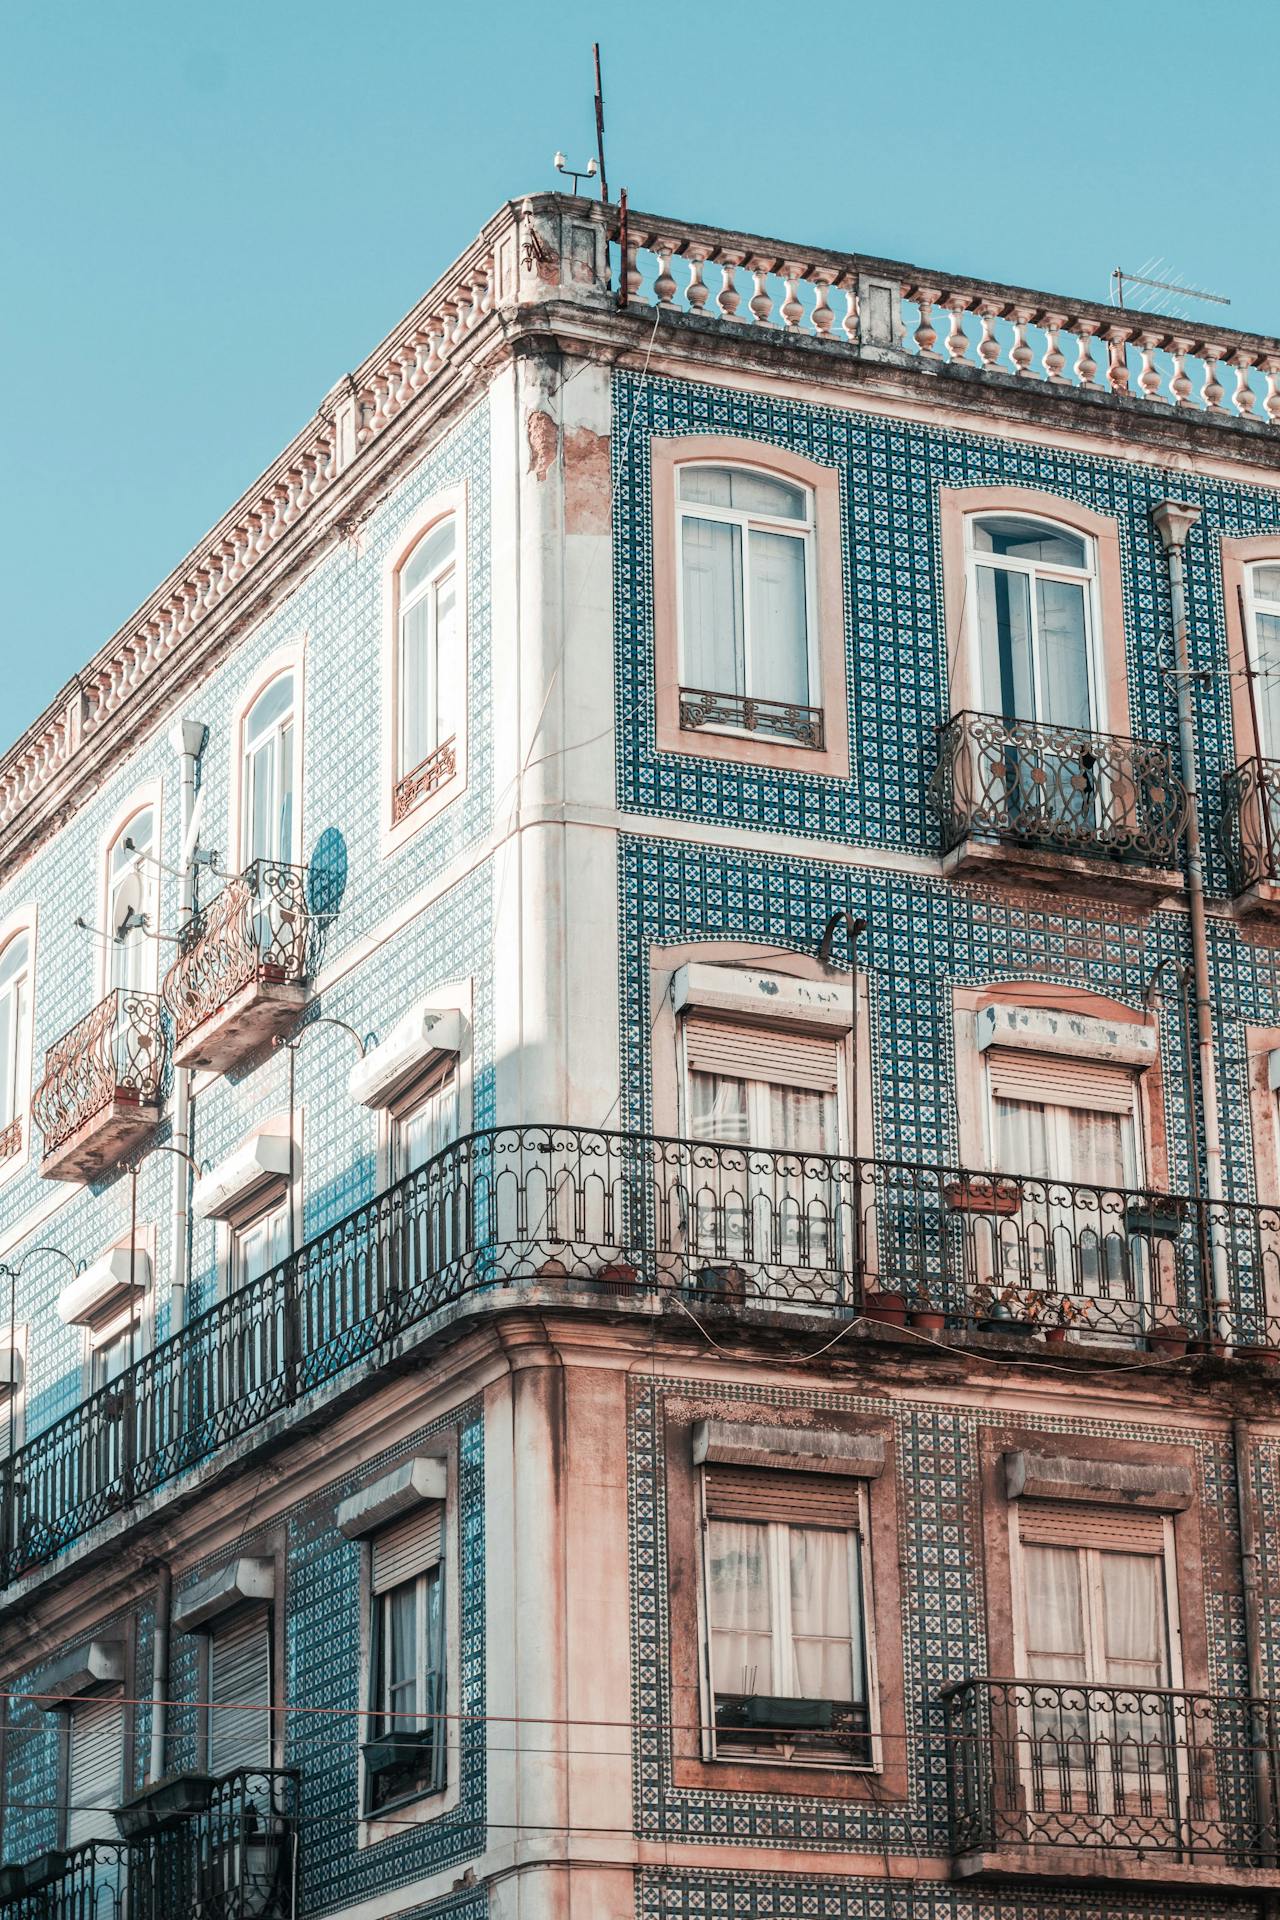 Lisbon apartment block with blue tiles on a blue sky background